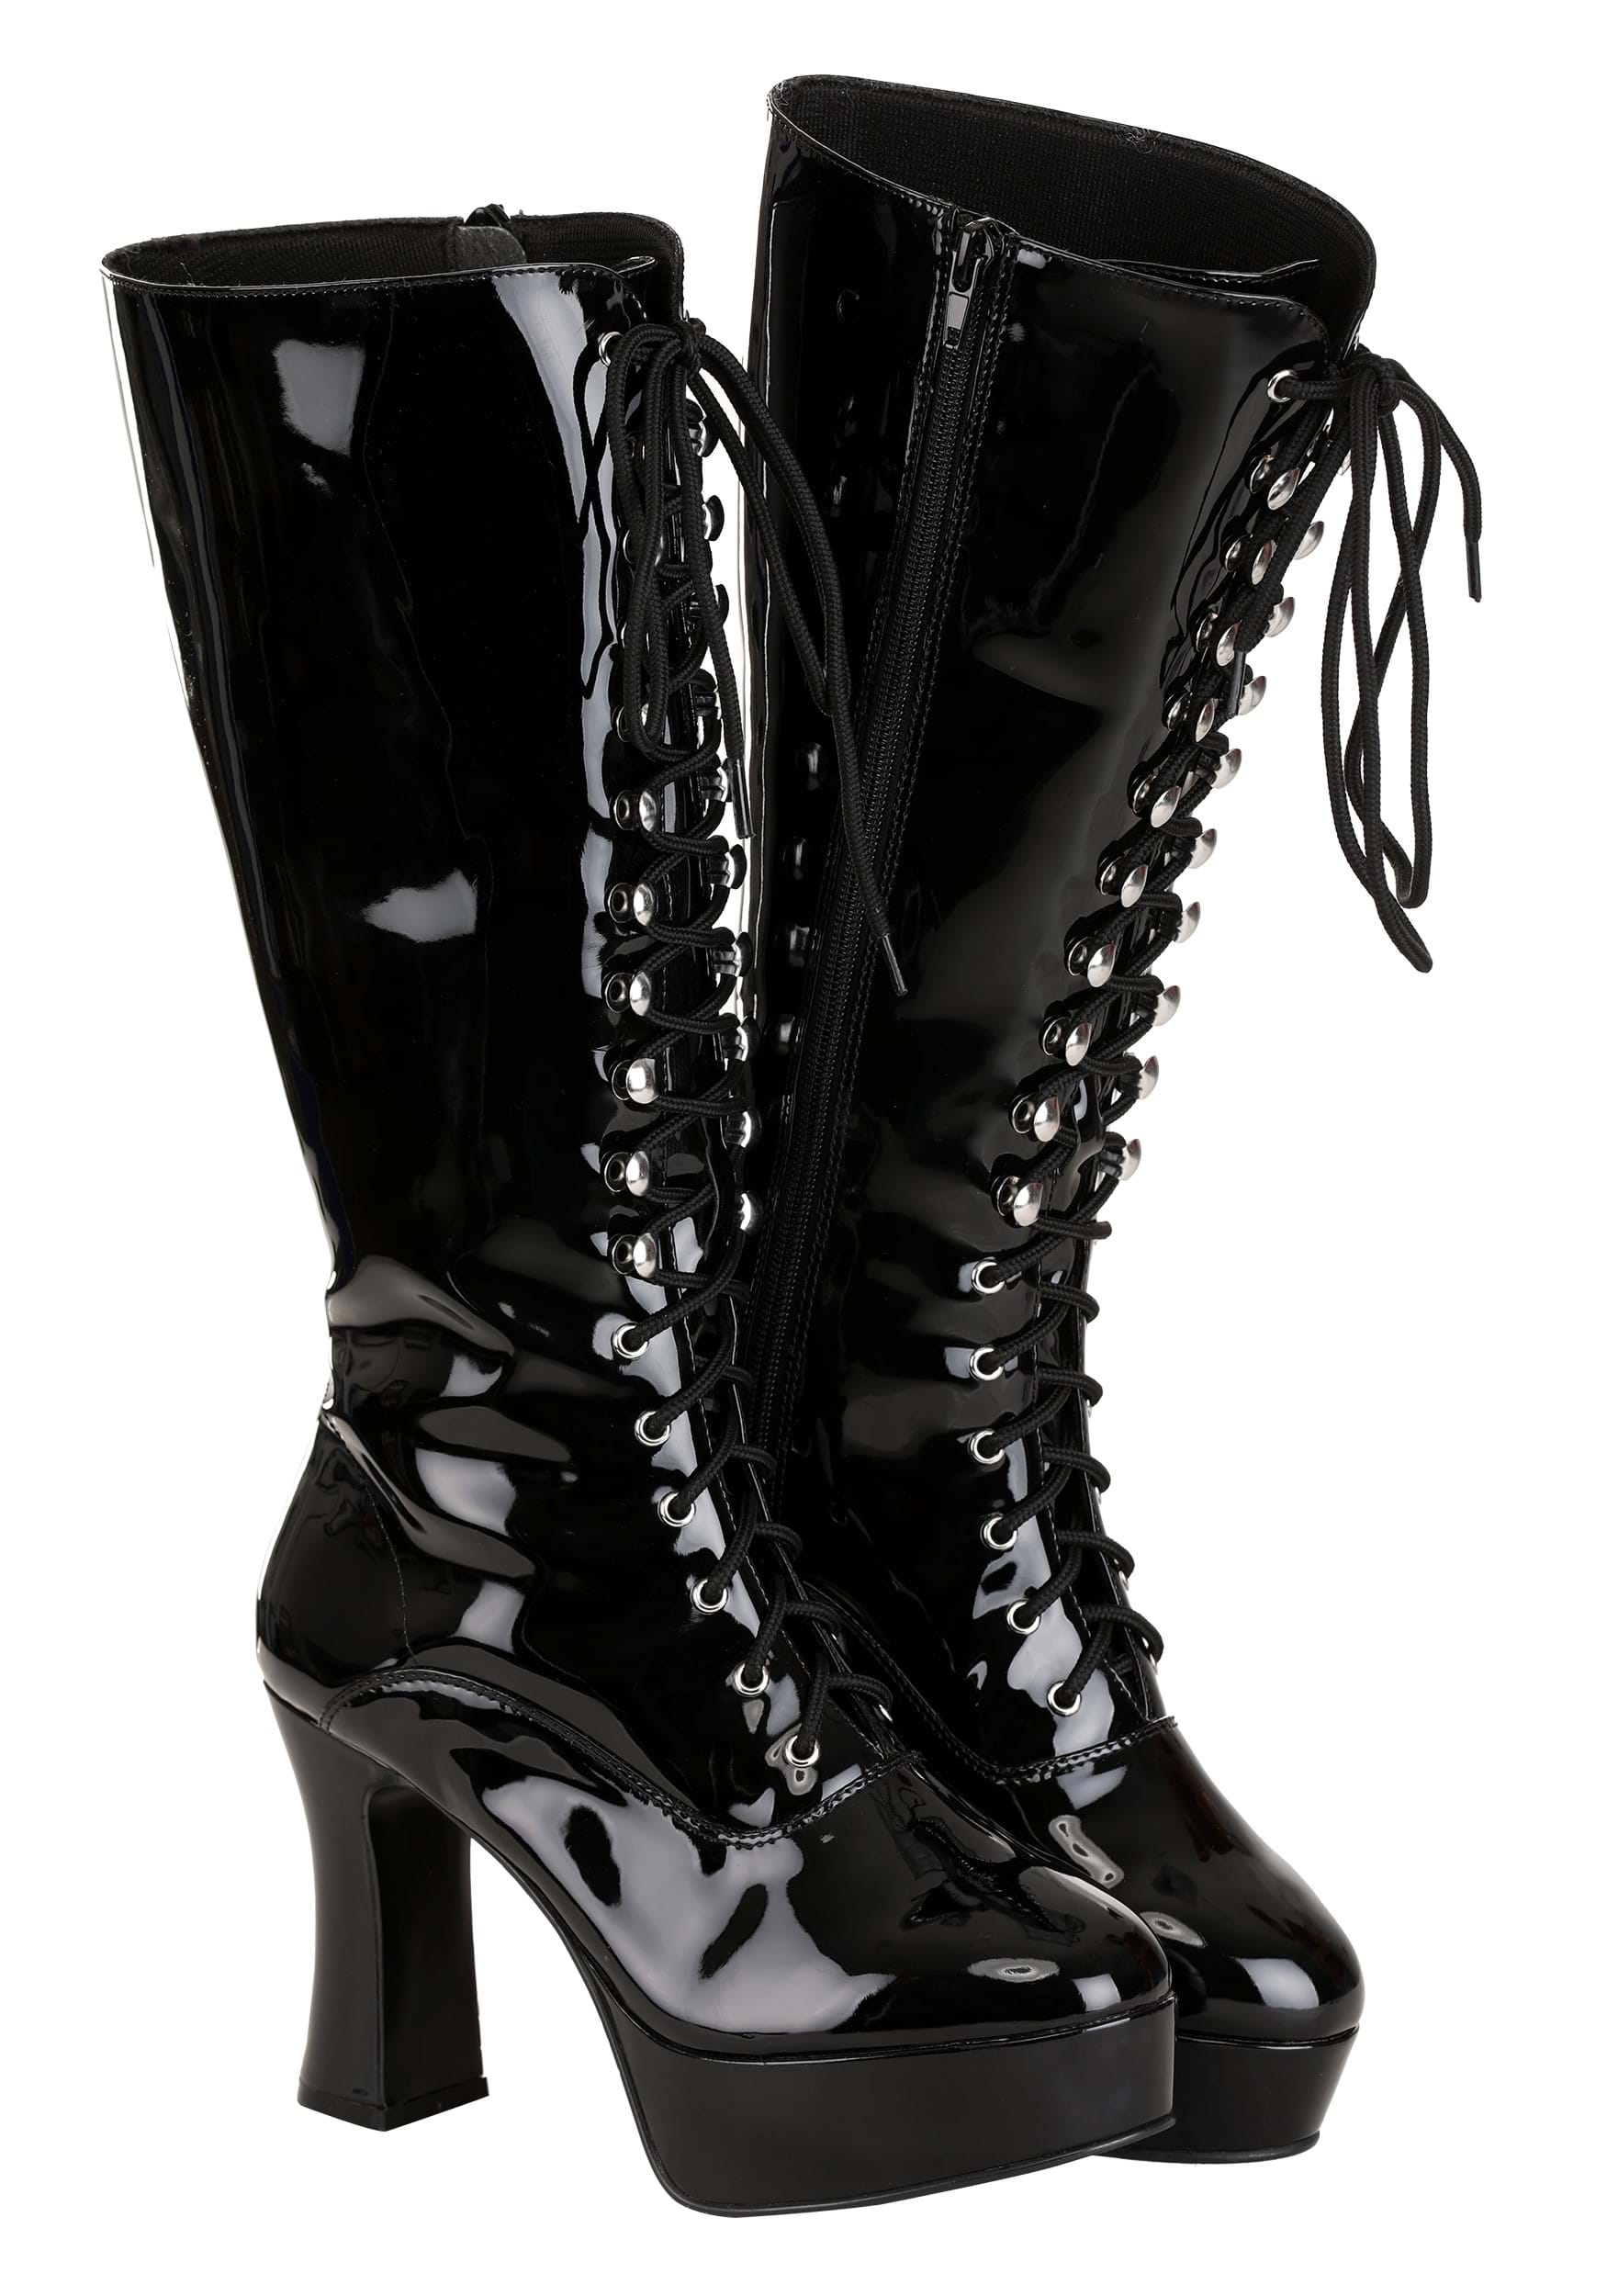 Image of Adult Sexy Black Faux Leather Knee High Boots ID FUN3412AD-7